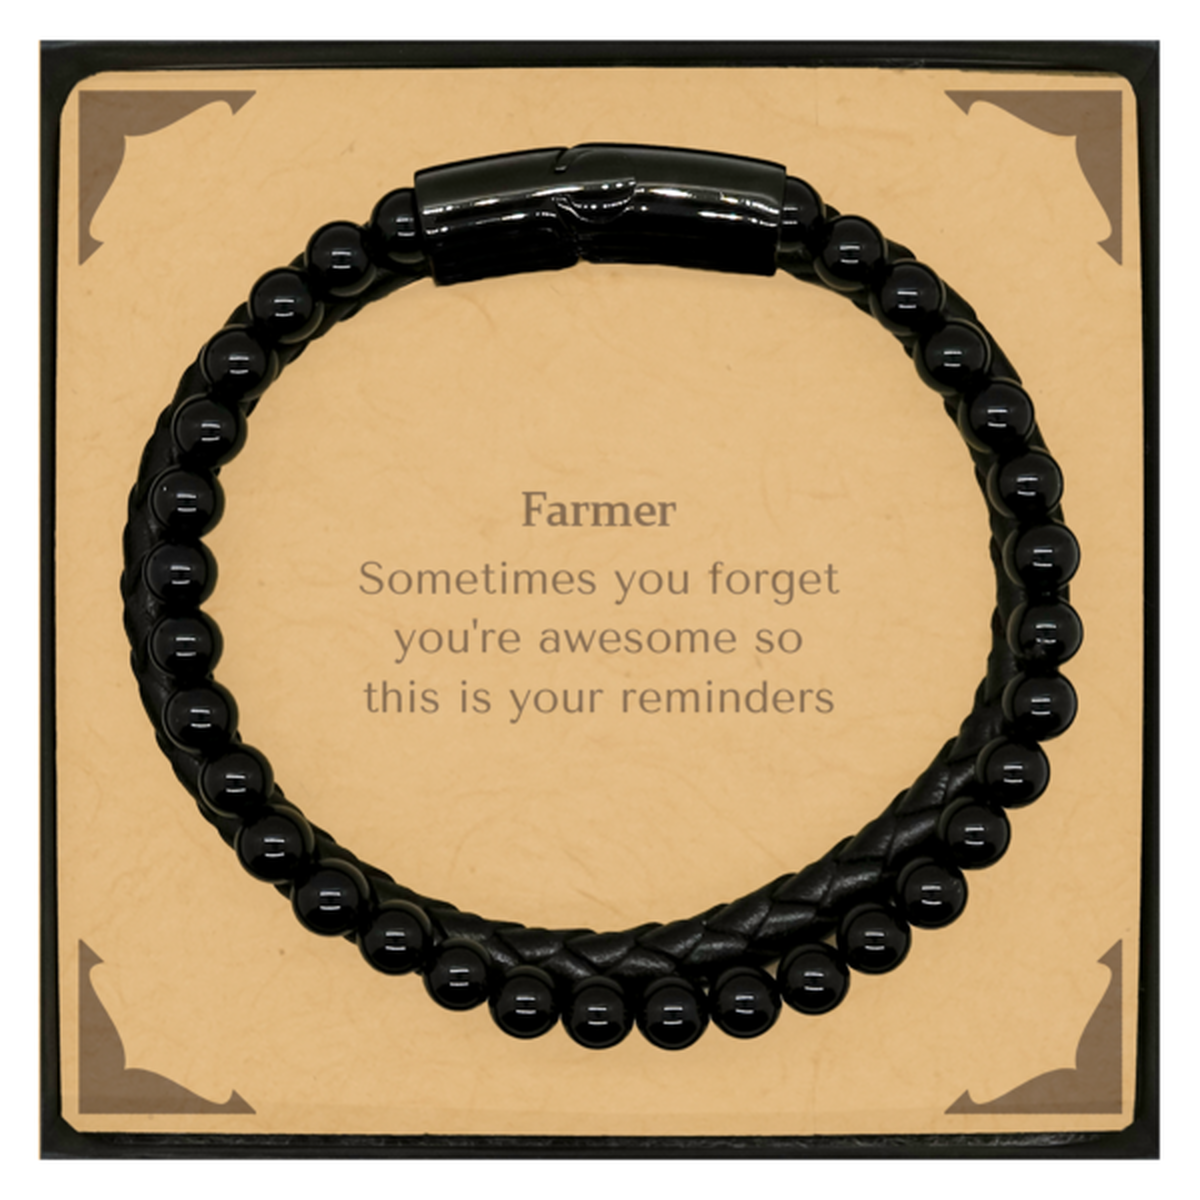 Sentimental Farmer Stone Leather Bracelets, Farmer Sometimes you forget you're awesome so this is your reminders, Graduation Christmas Birthday Gifts for Farmer, Men, Women, Coworkers